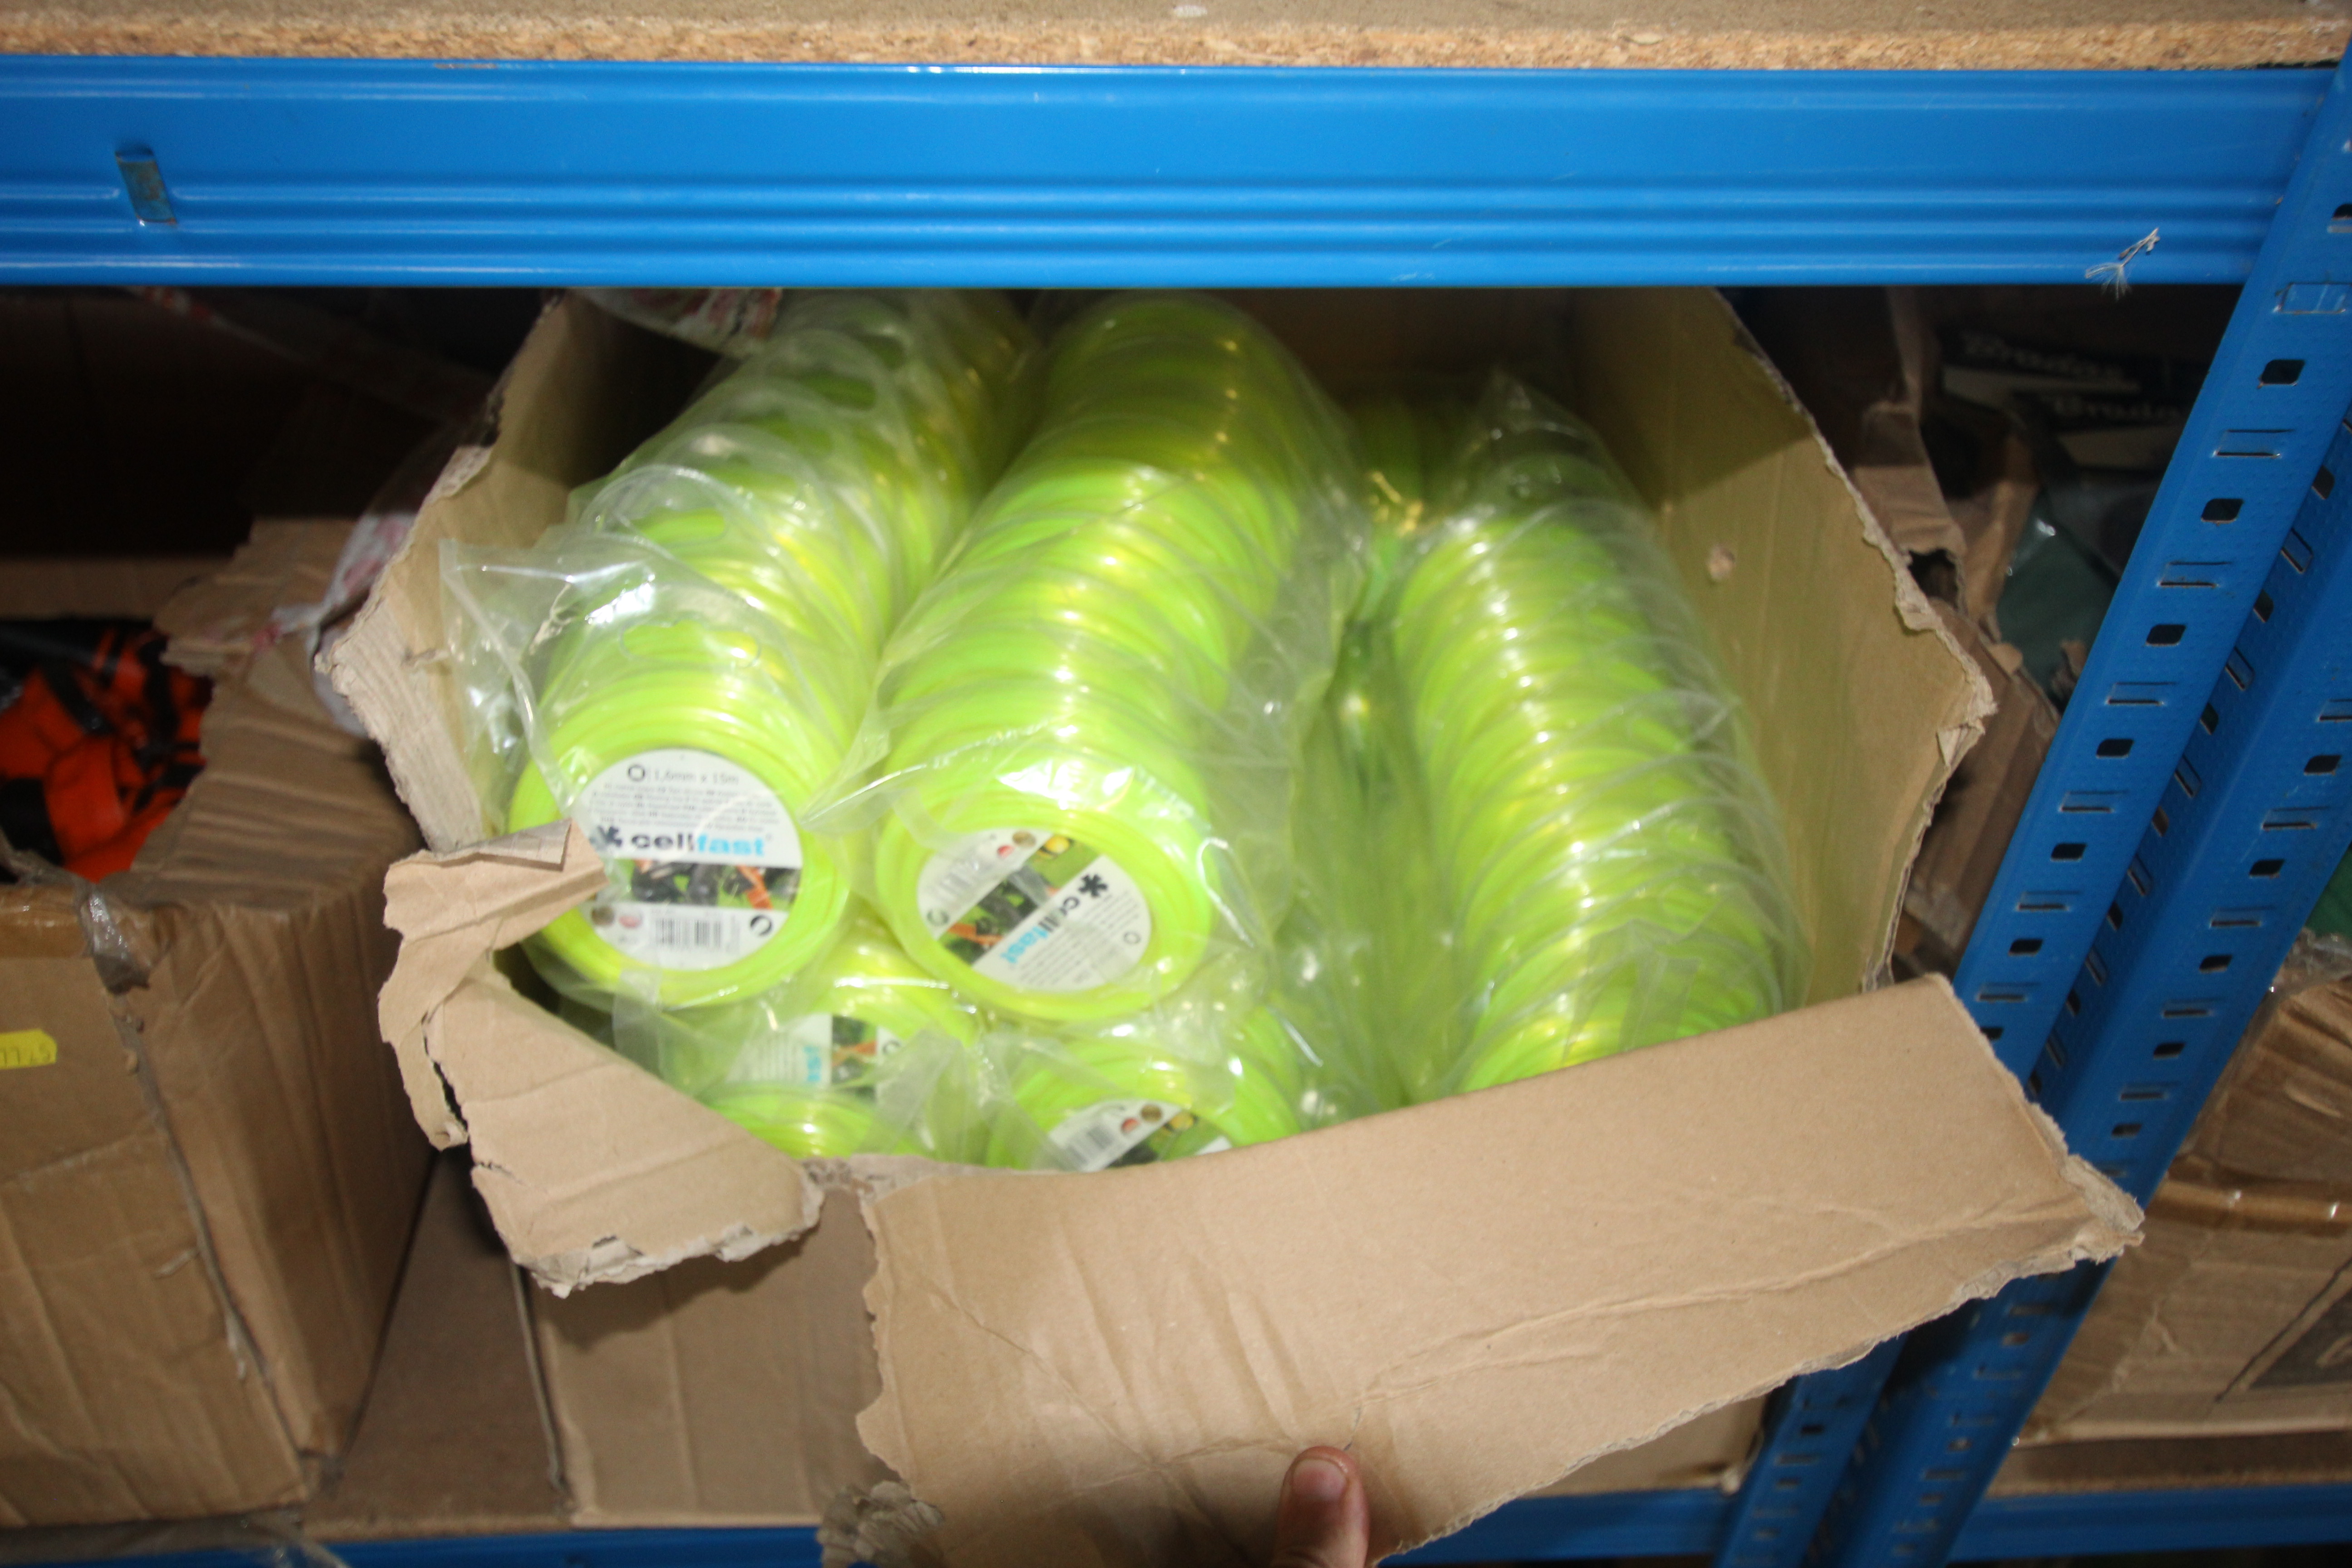 A box containing a large quantity of Cellfast neon